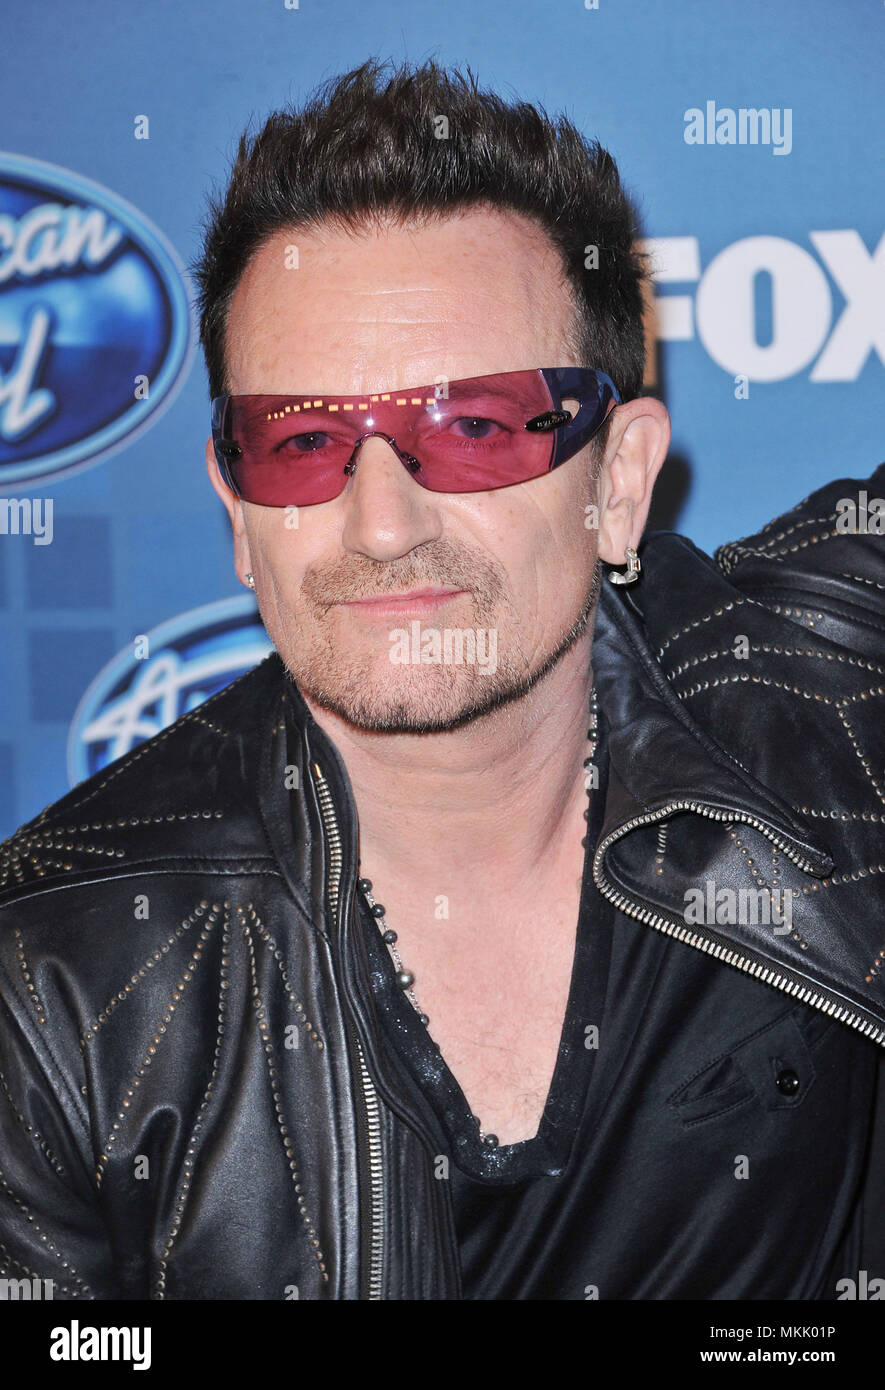 Bono  - U2 - 16 at American Idol Final 2011 at the Nokia Theatre in Los Angeles.a_Bono - U2 __04 Red Carpet Event, Vertical, USA, Film Industry, Celebrities,  Photography, Bestof, Arts Culture and Entertainment, Topix Celebrities fashion /  Vertical, Best of, Event in Hollywood Life - California,  Red Carpet and backstage, USA, Film Industry, Celebrities,  movie celebrities, TV celebrities, Music celebrities, Photography, Bestof, Arts Culture and Entertainment,  Topix, headshot, vertical, one person,, from the year , 2011, inquiry tsuni@Gamma-USA.com Stock Photo